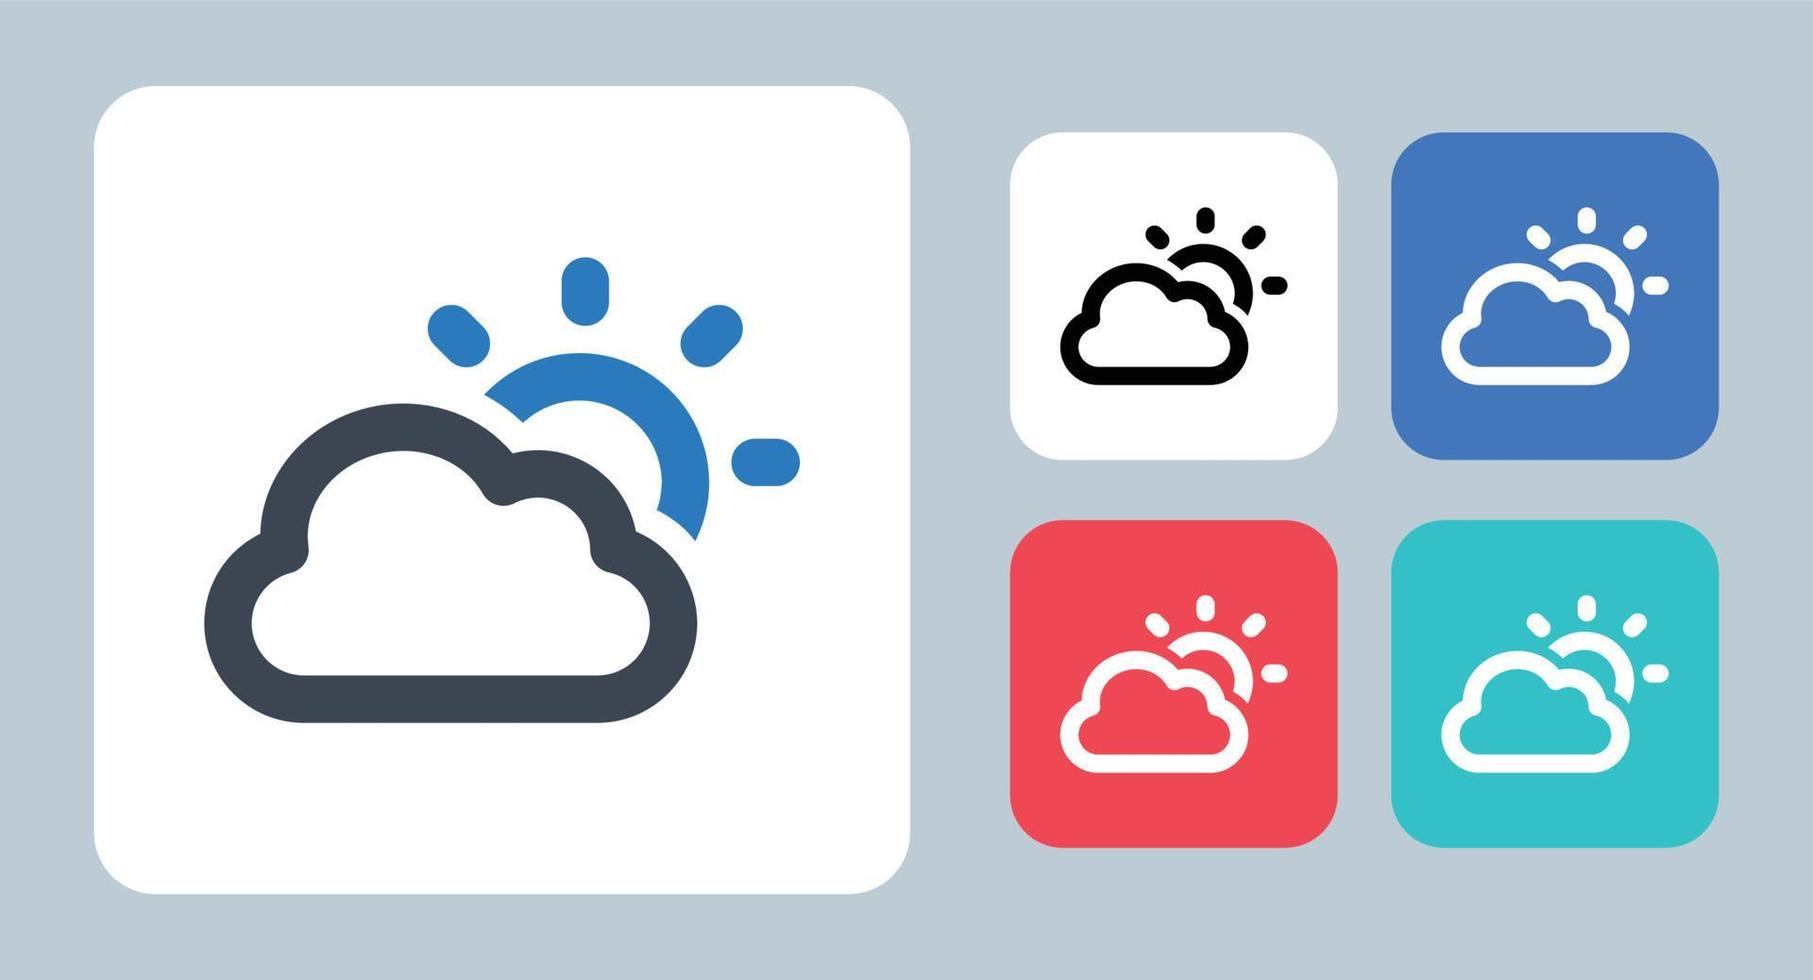 Weather icon - vector illustration . Weather, Sun, Climate, Forecast, Sunny, Day, Cloud, Cloudy, summer, hot, line, outline, flat, icons .